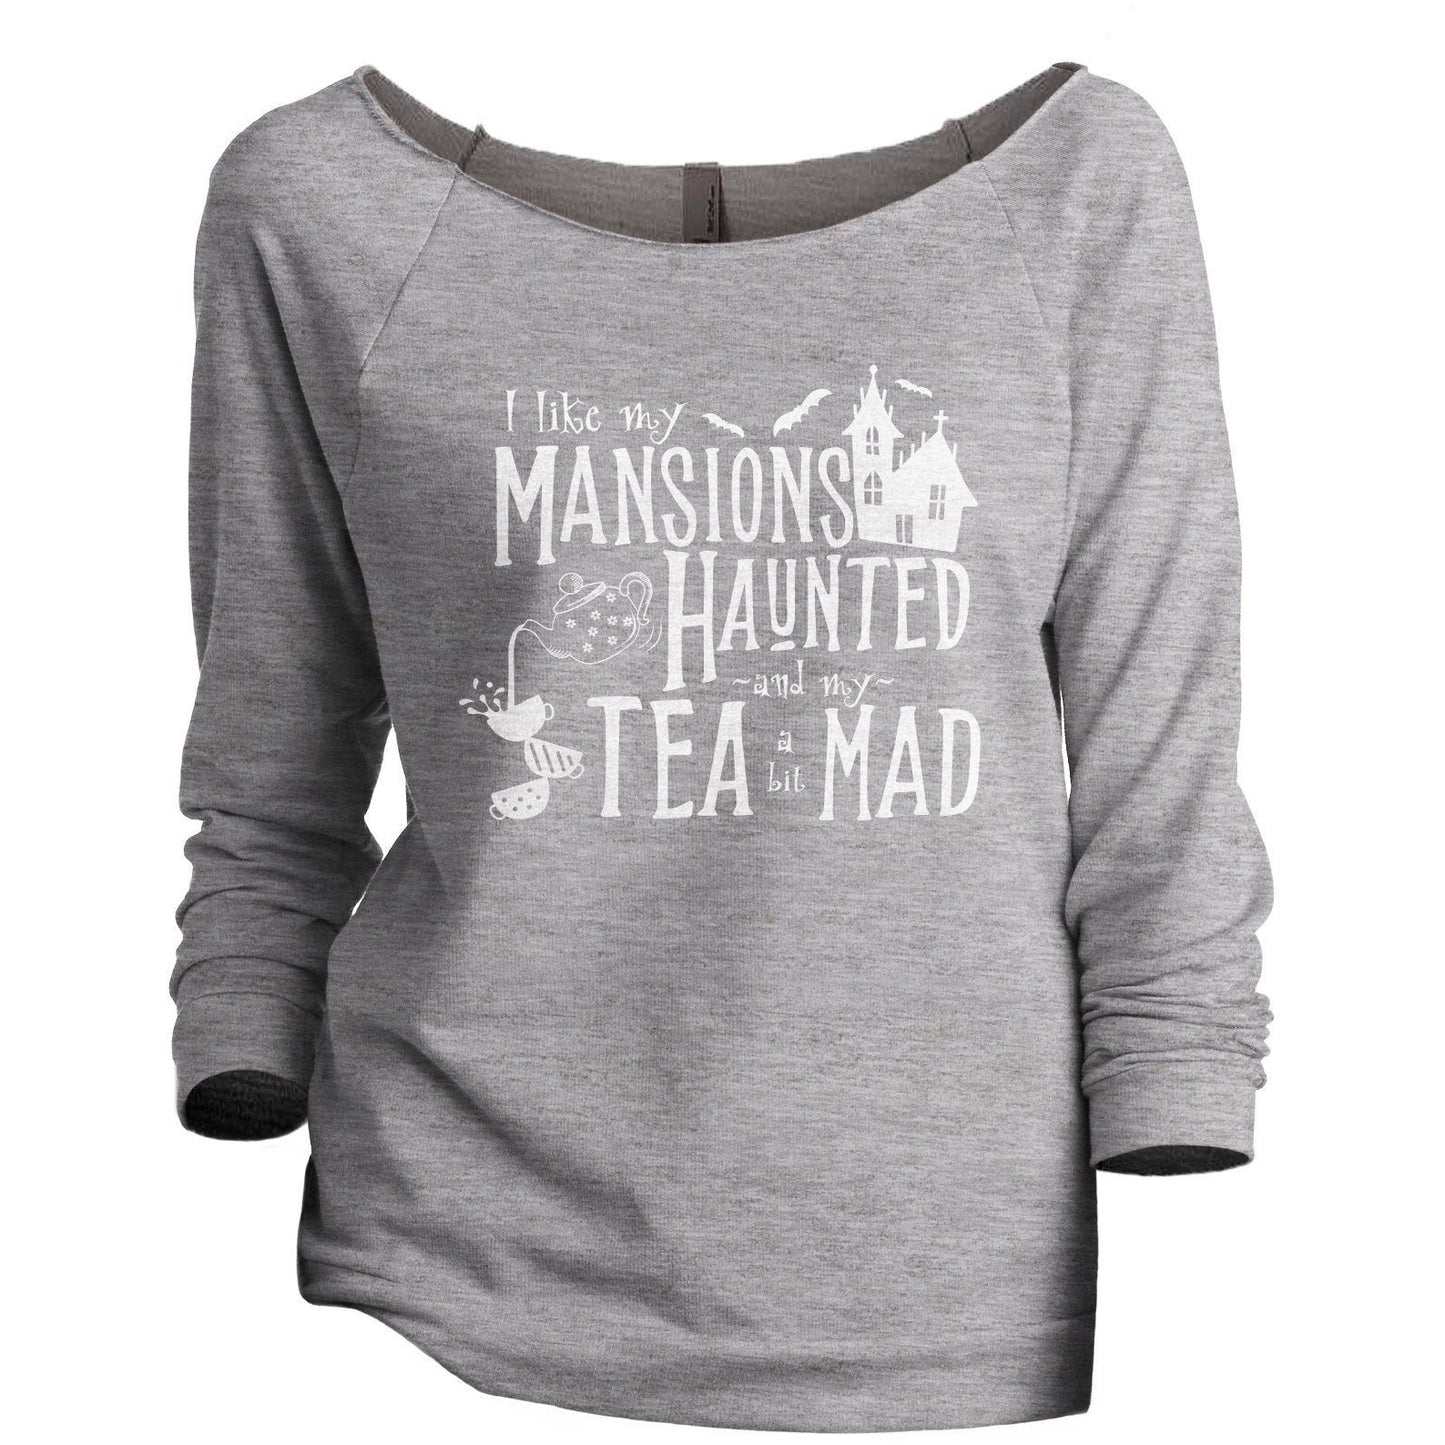 I Like My Mansions Haunted And My Tea A Bit Mad